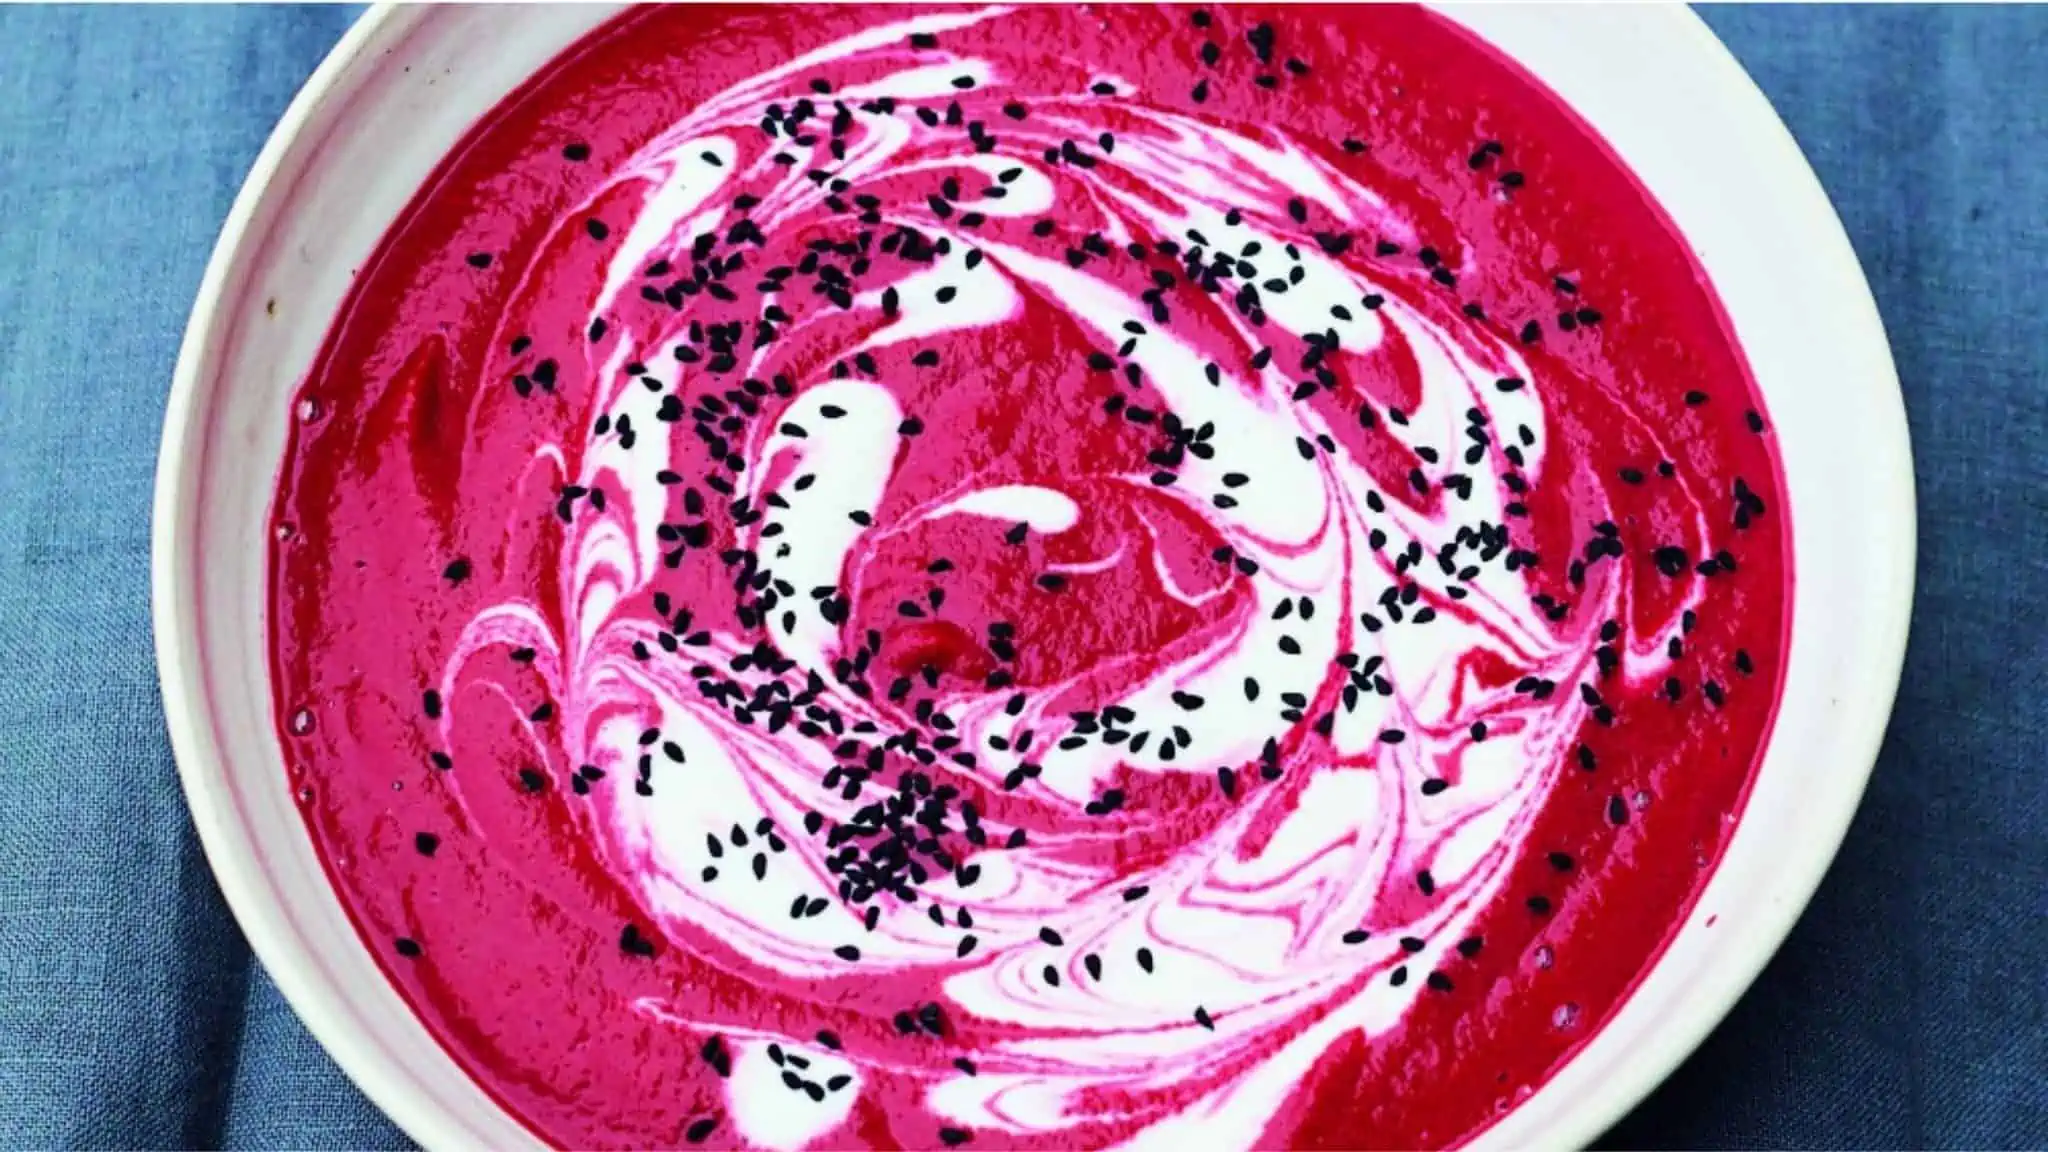 Creamy Pink Beetroot Soup — The Best Warming Vegan Soup With Beets!